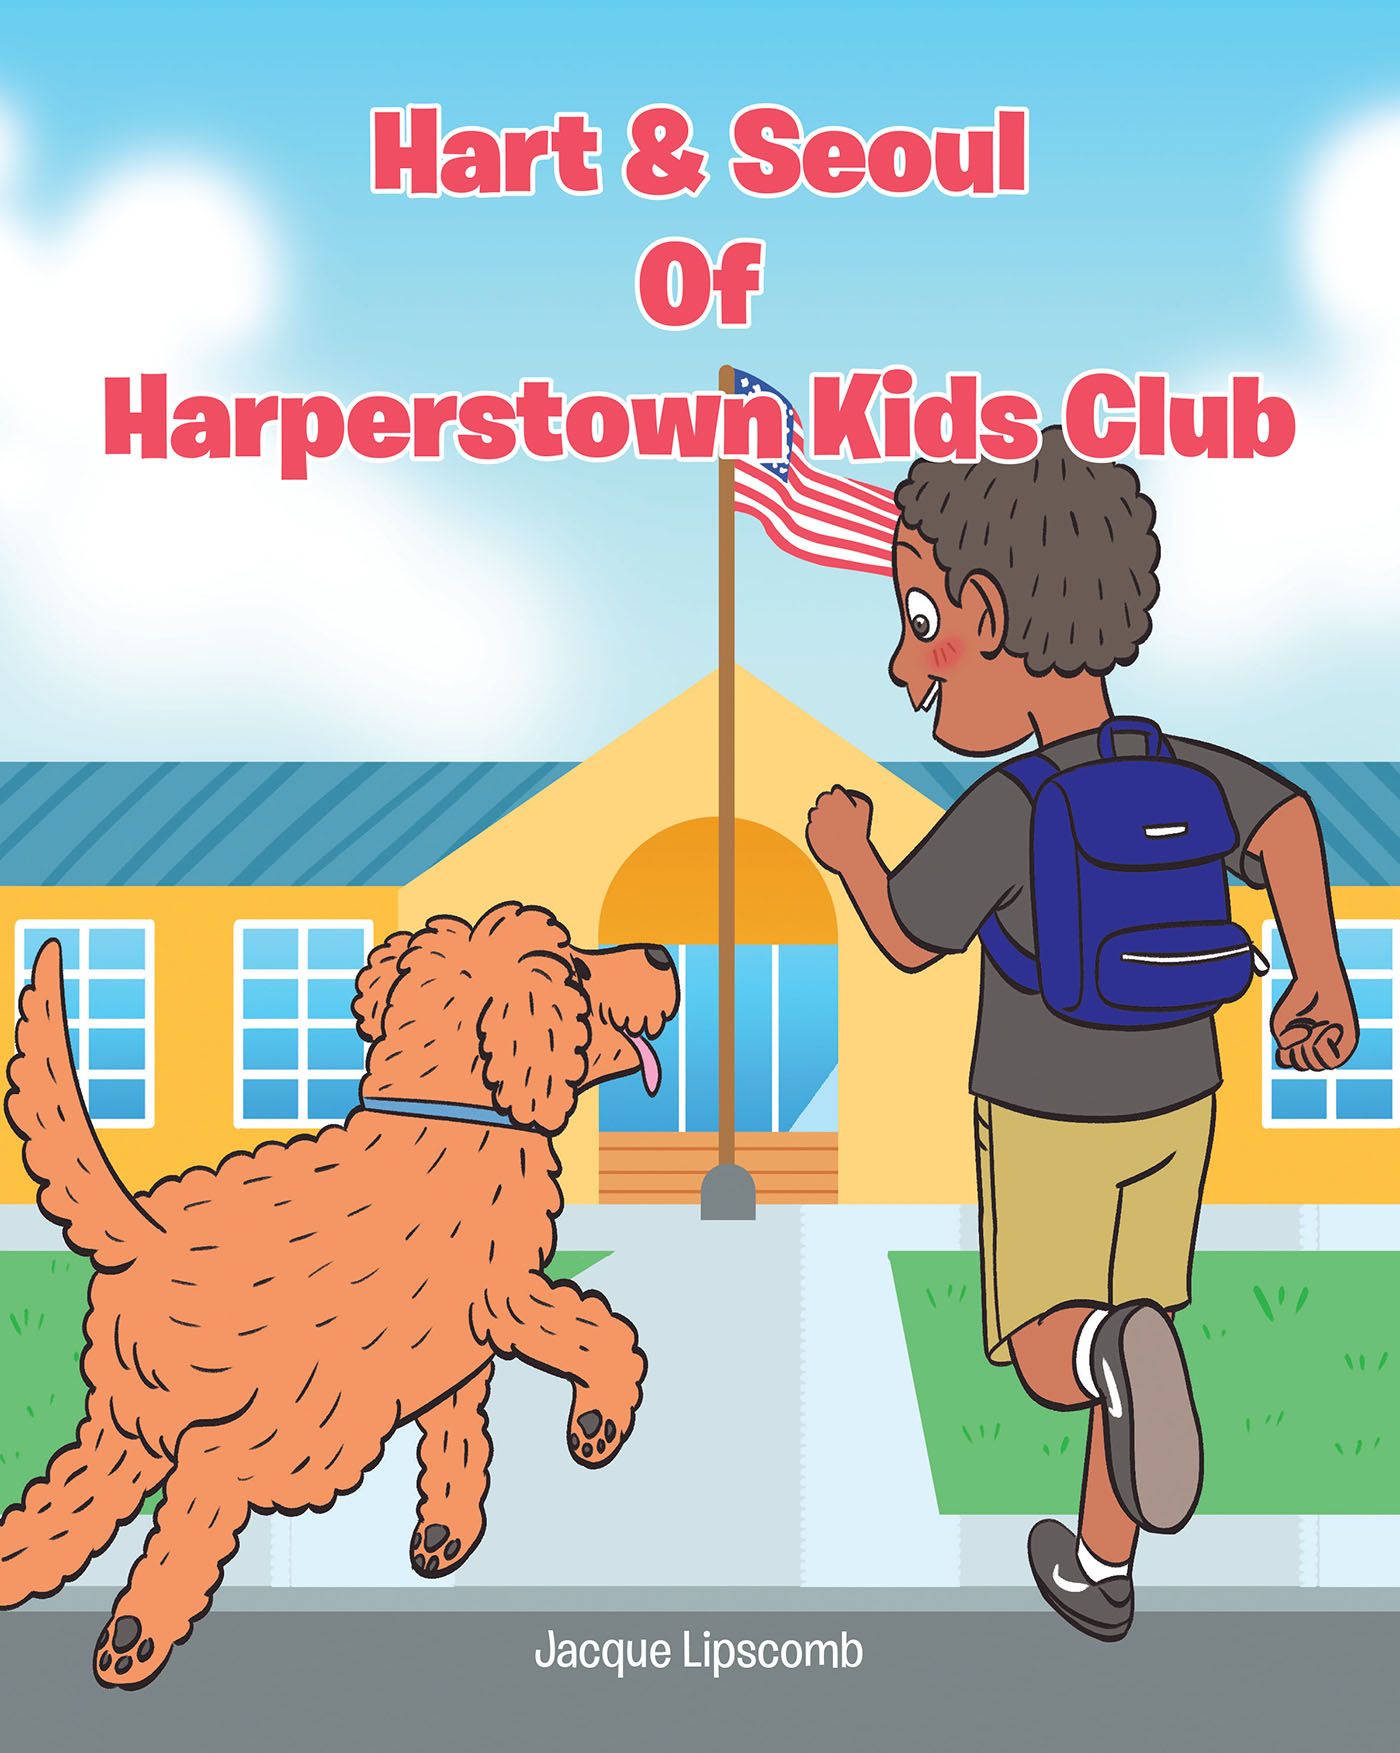 Jacqueline Lipscomb’s Newly Released “Hart & Seoul Of Harperstown Kids Club” is a Lighthearted Story of a Young Boy and a Special Town